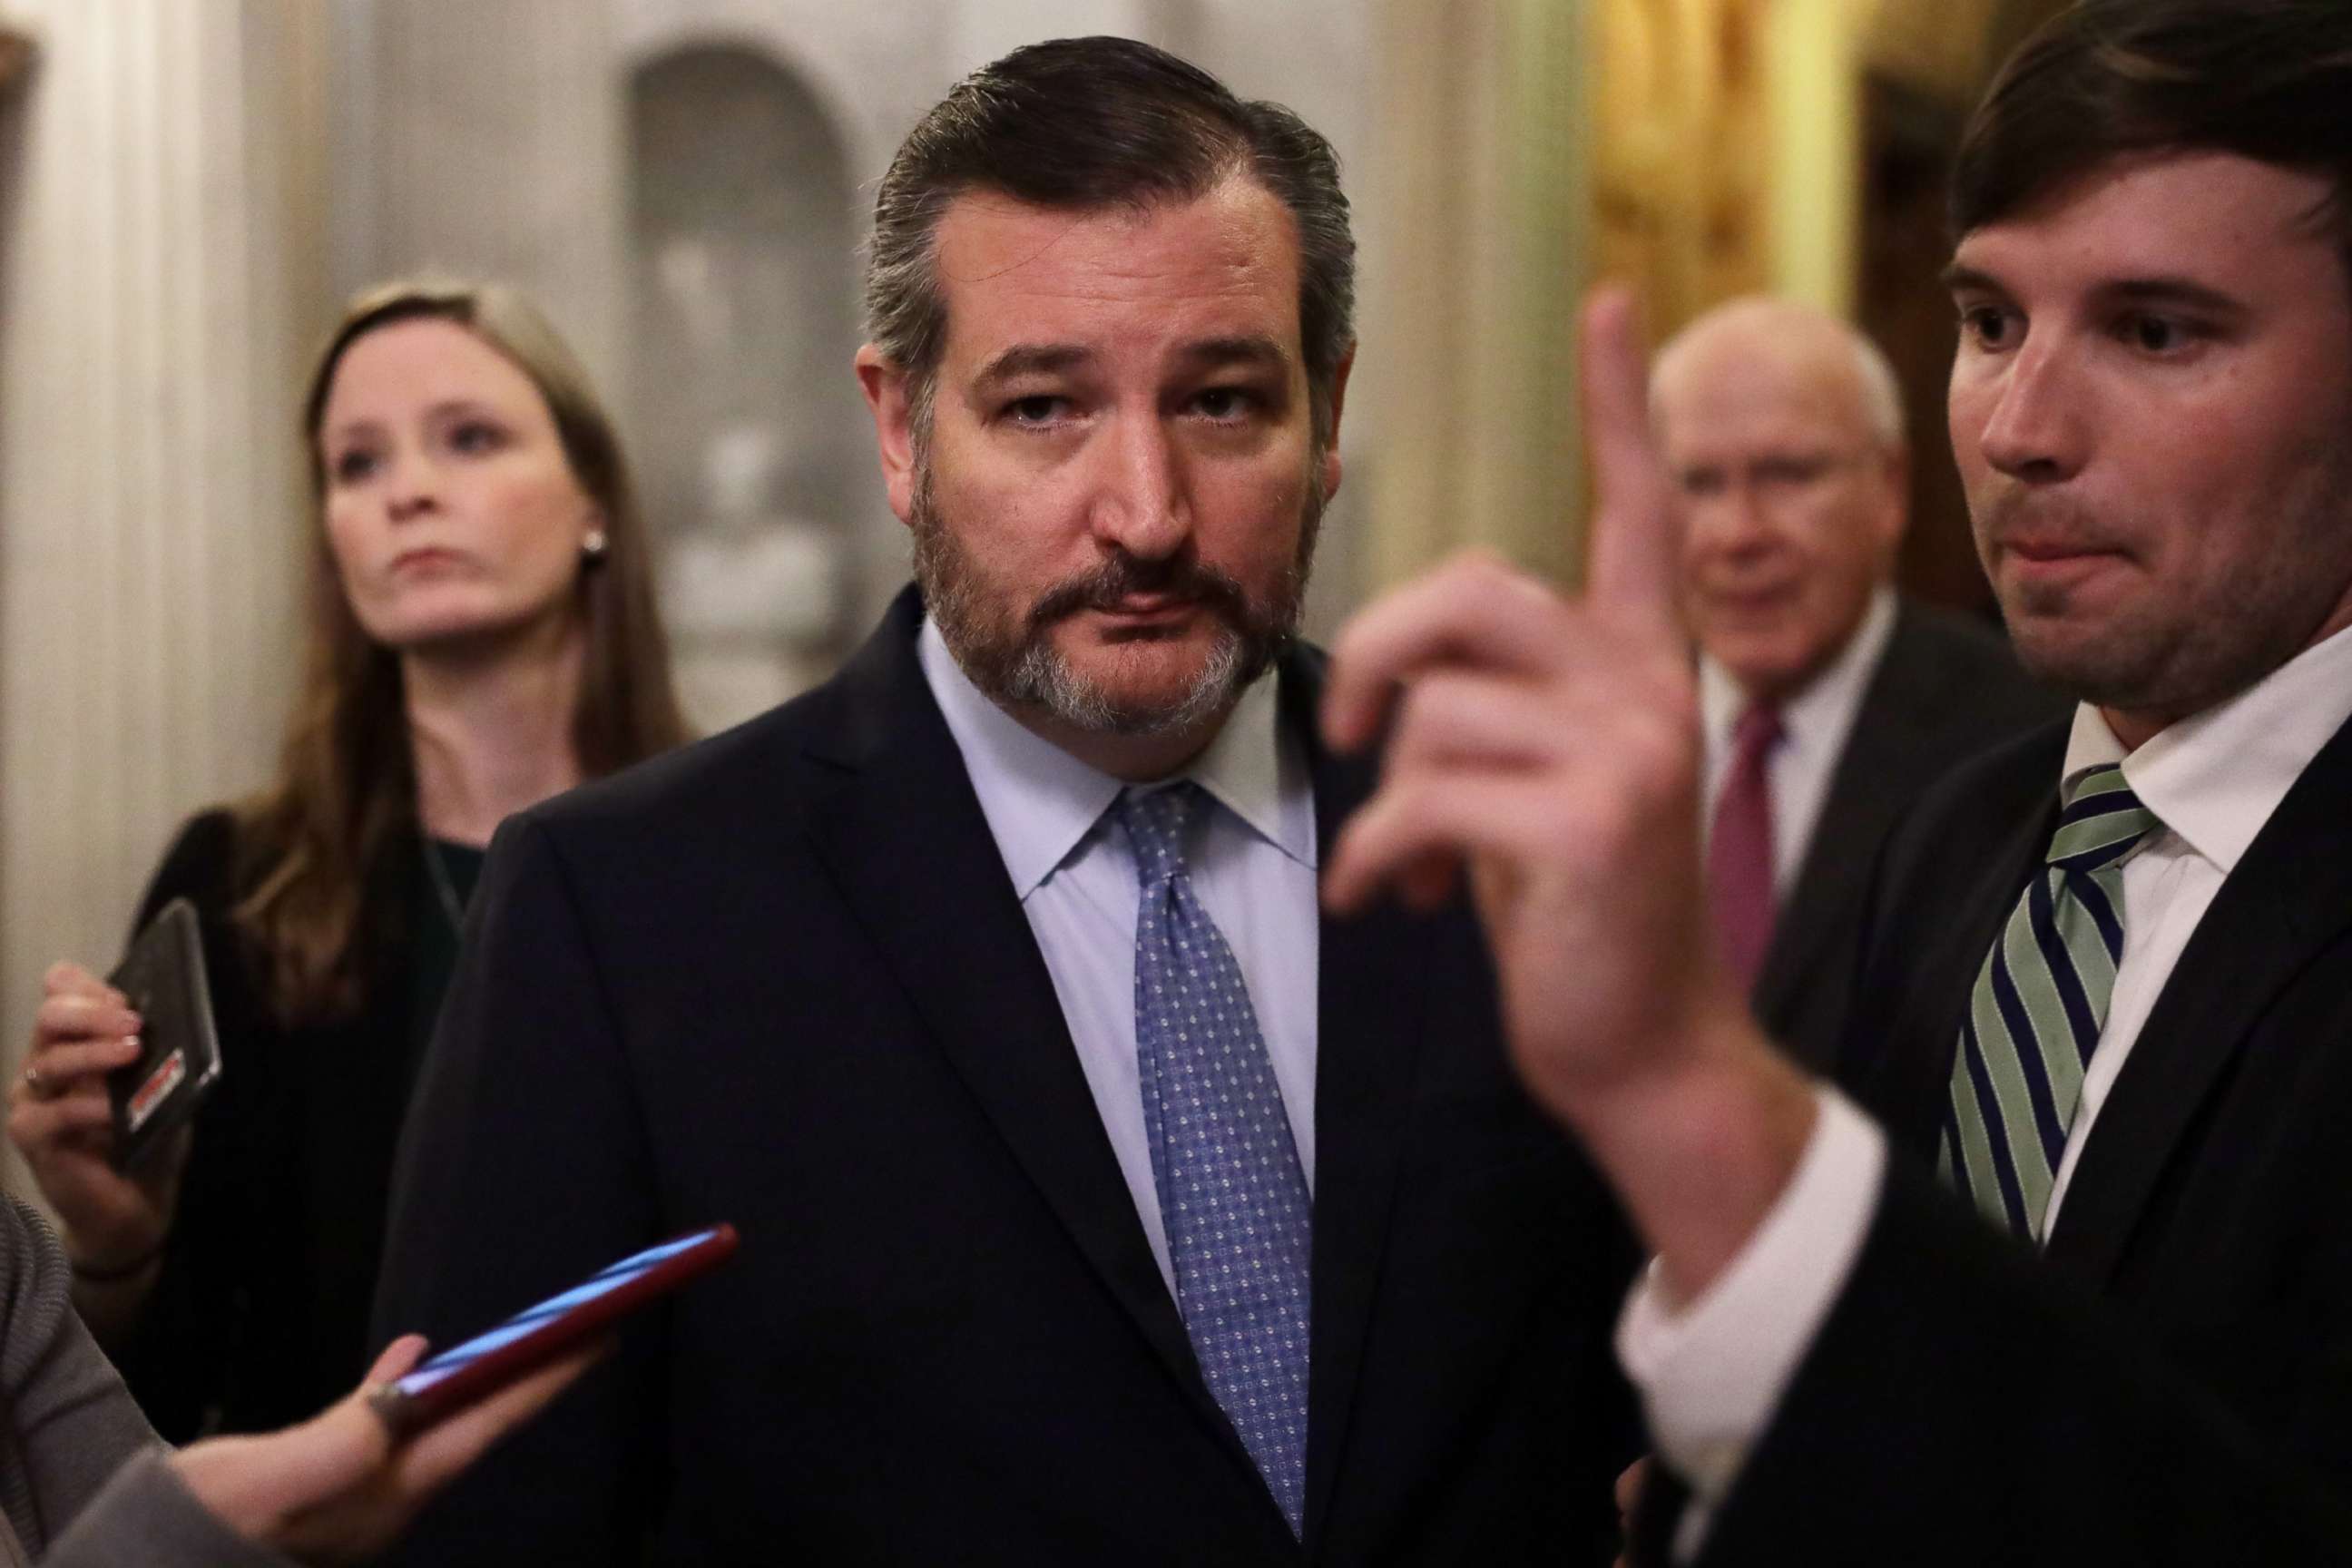 PHOTO: Sen. Ted Cruz, R-Texas, leaves after a vote at the Capitol in Washington, D.C., Dec. 2, 2019.